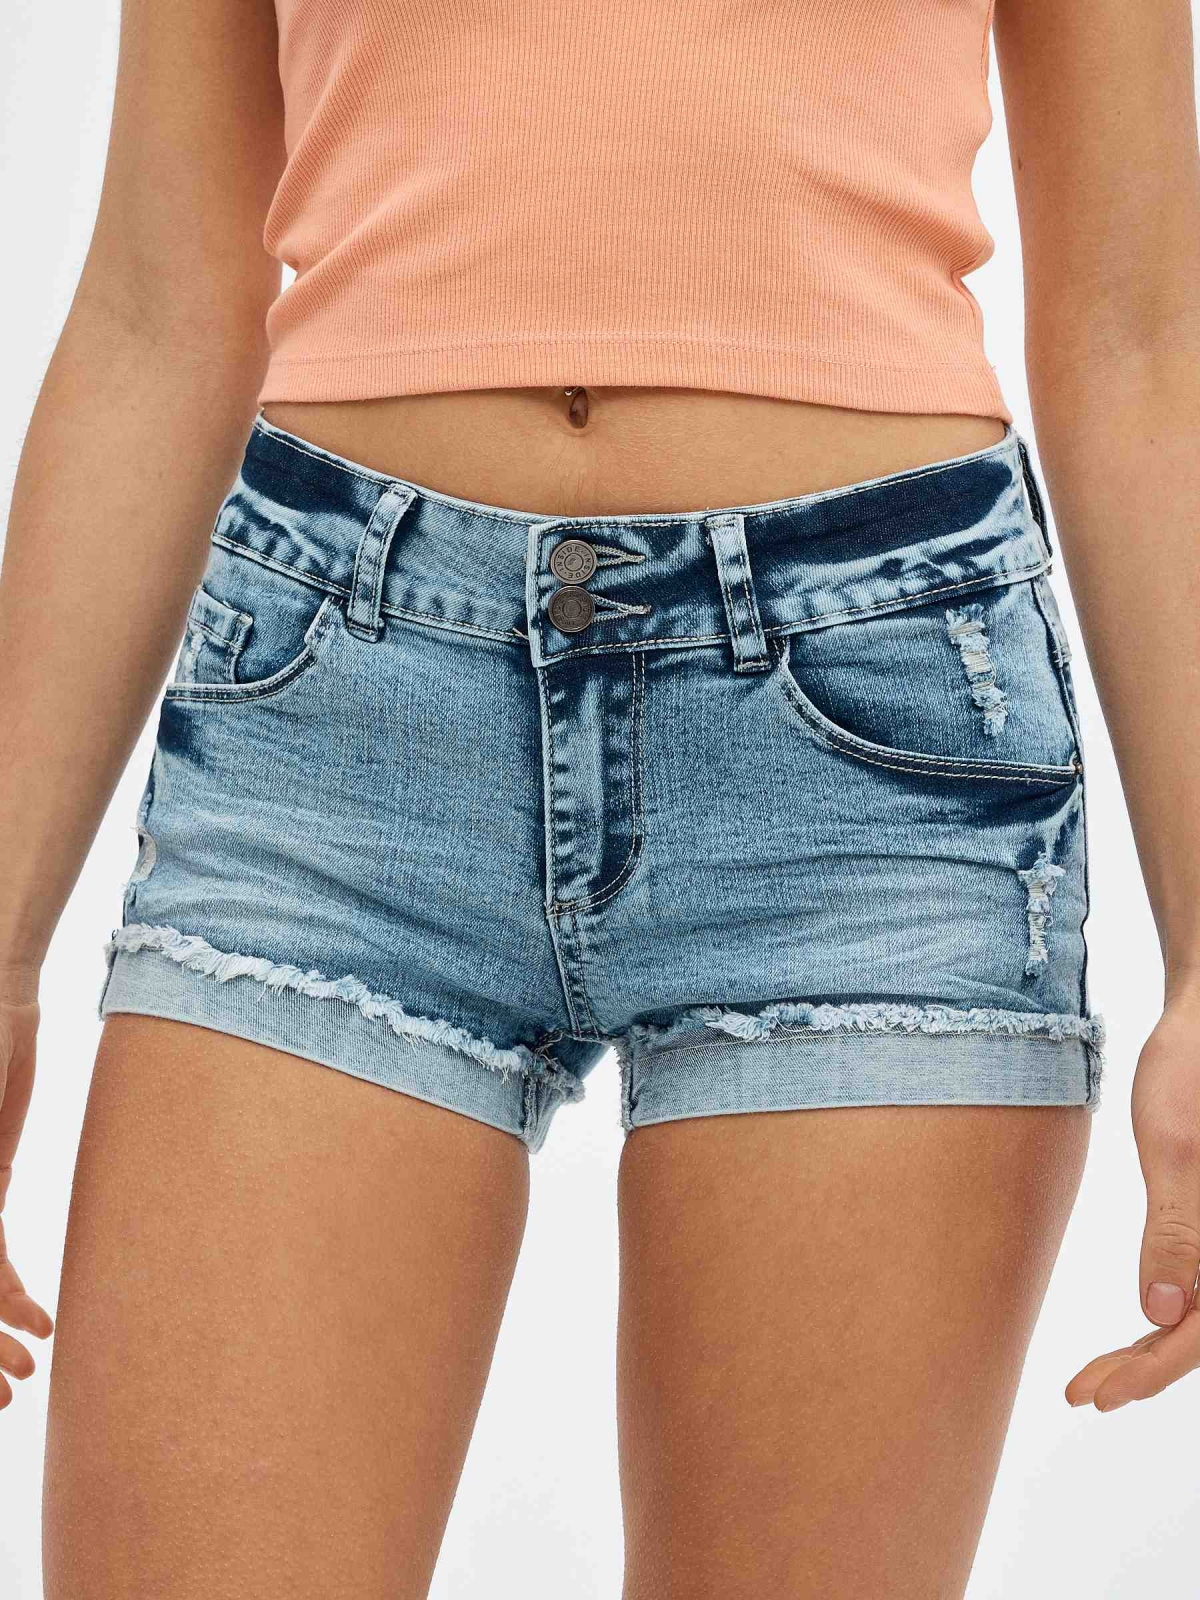 Ripped washed effect denim shorts blue detail view